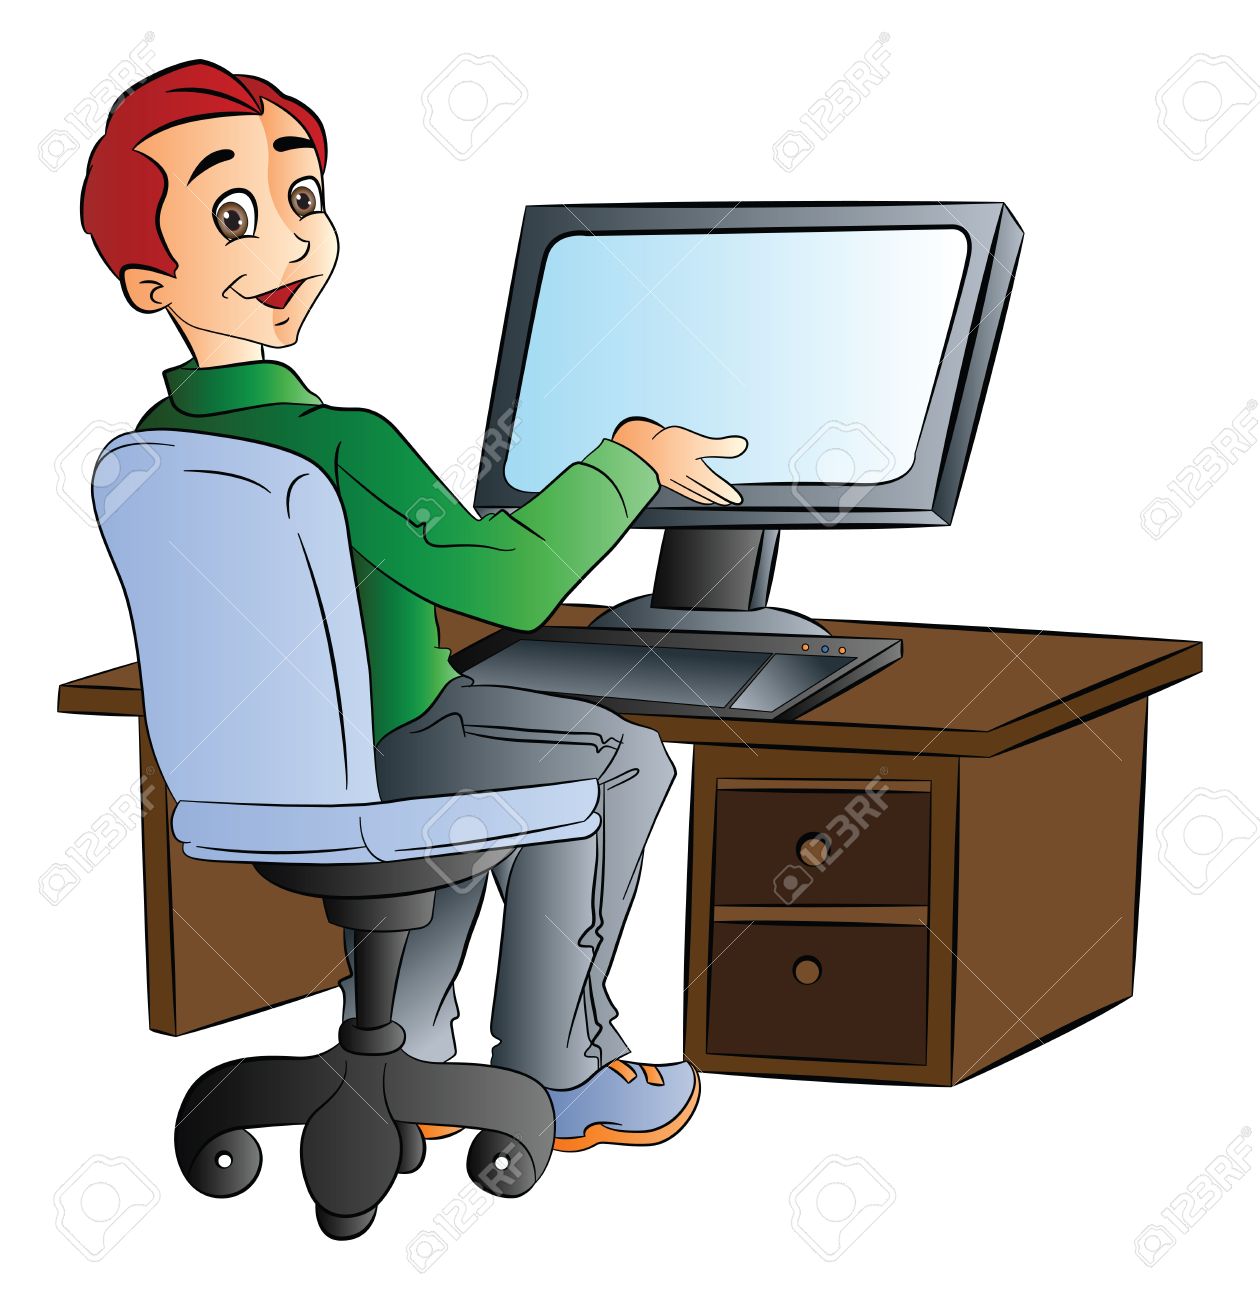 Working father clipart